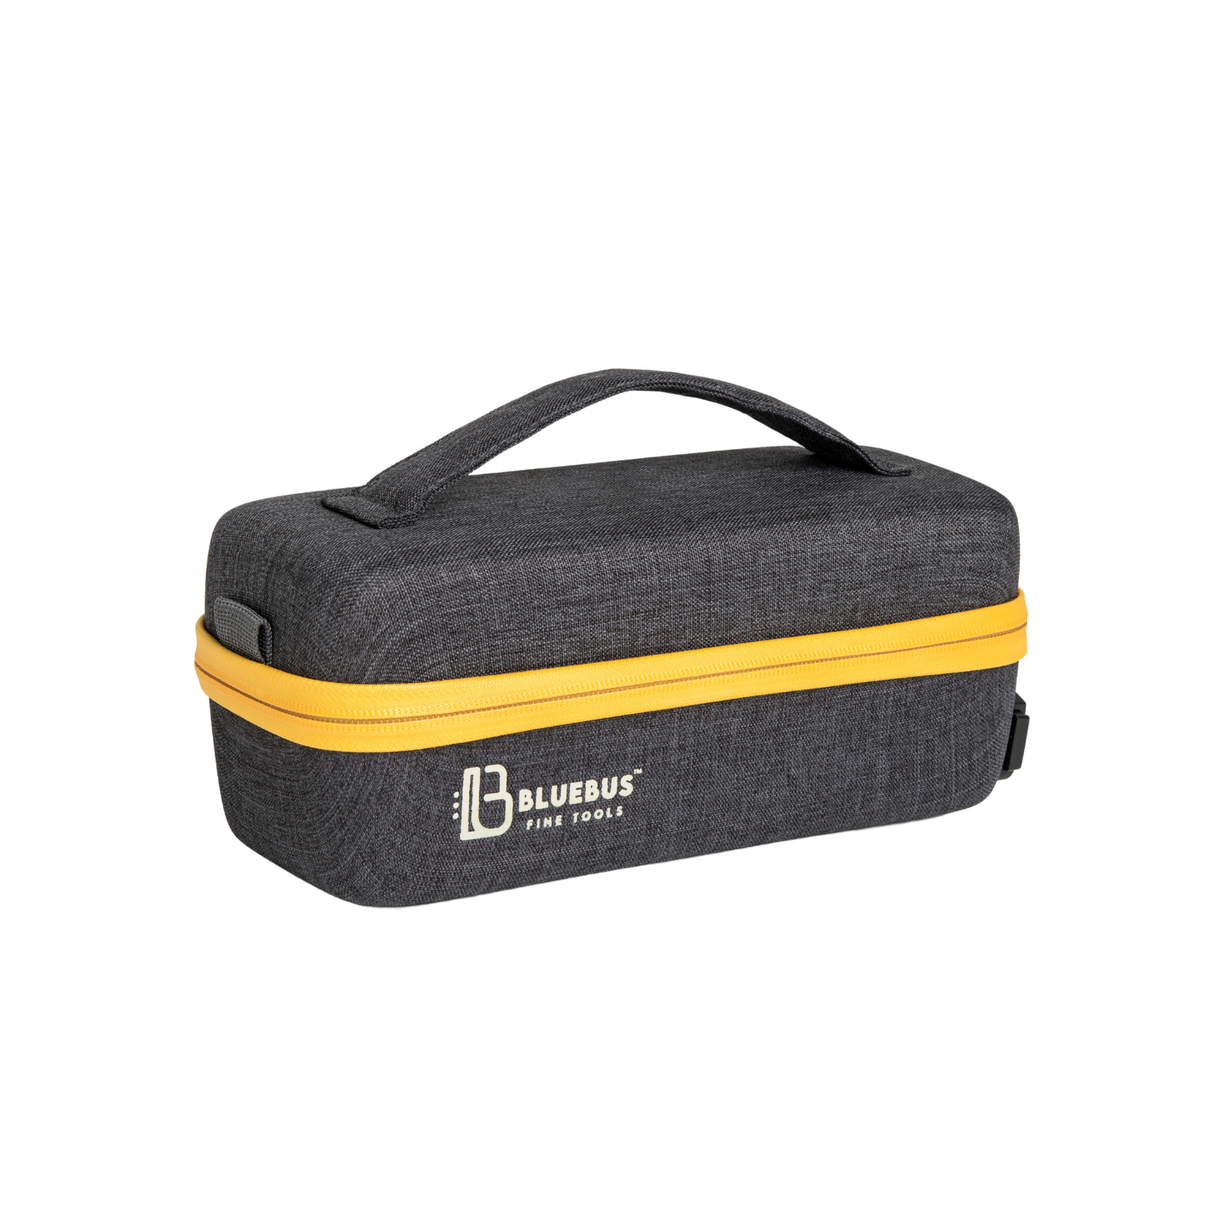 BULLDOG Smell Proof Stash Bag by Blue Bus, compact black case with yellow zipper, front view